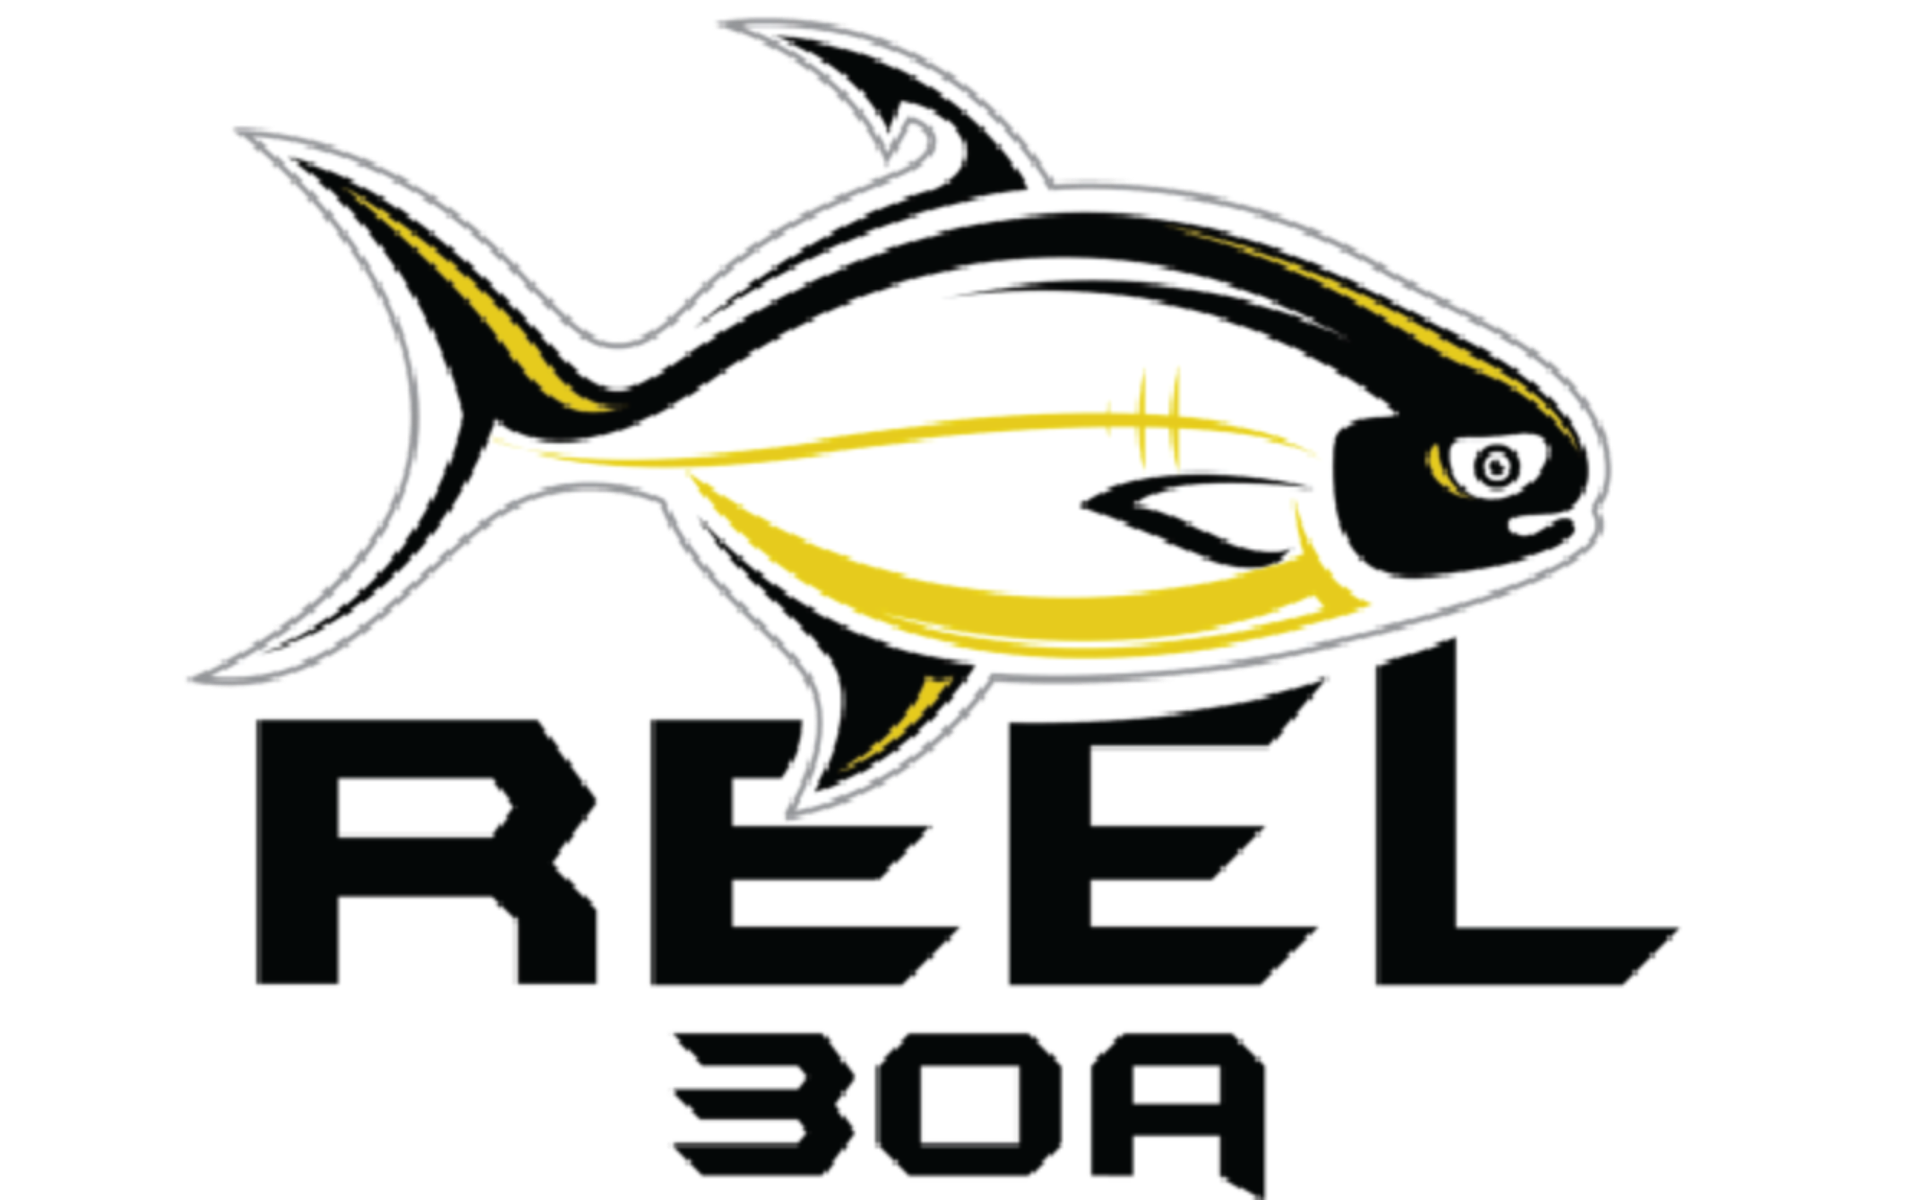 Reel30a  Surf Fishing Rentals & Charters